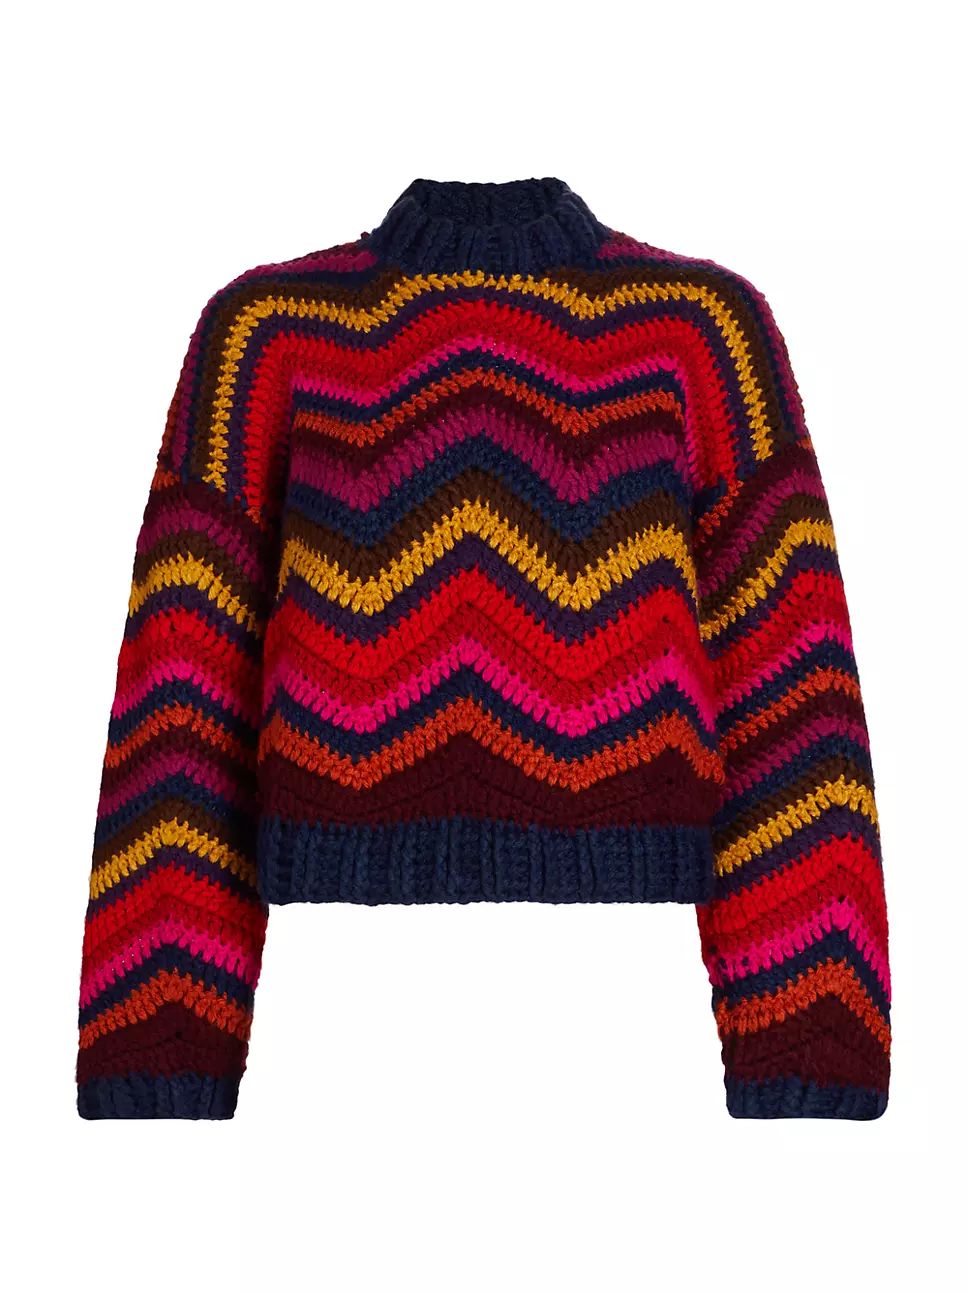 Colorful Waves Crochet Sweater | Saks Fifth Avenue